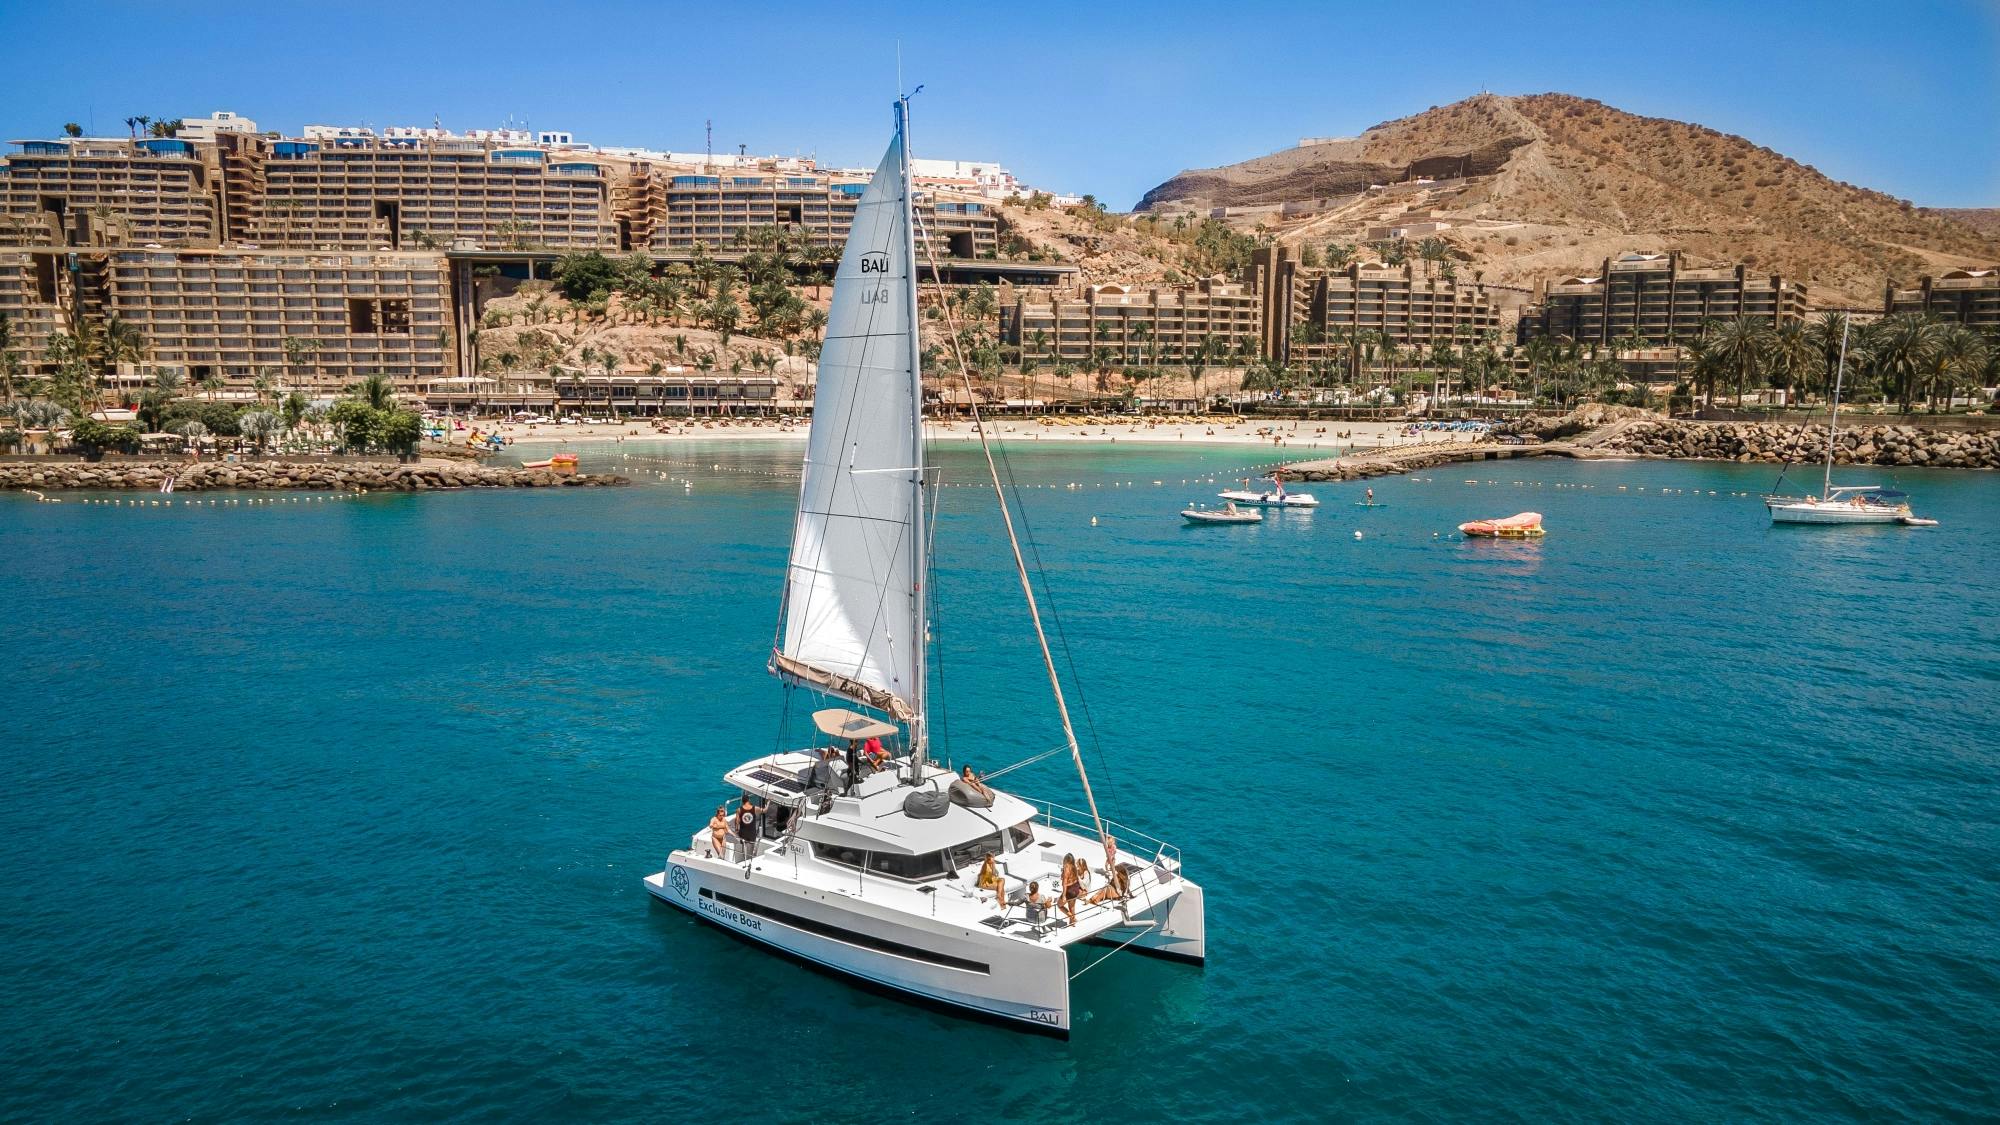 Gran Canaria Afternoon Exclusive Sailing Cruise